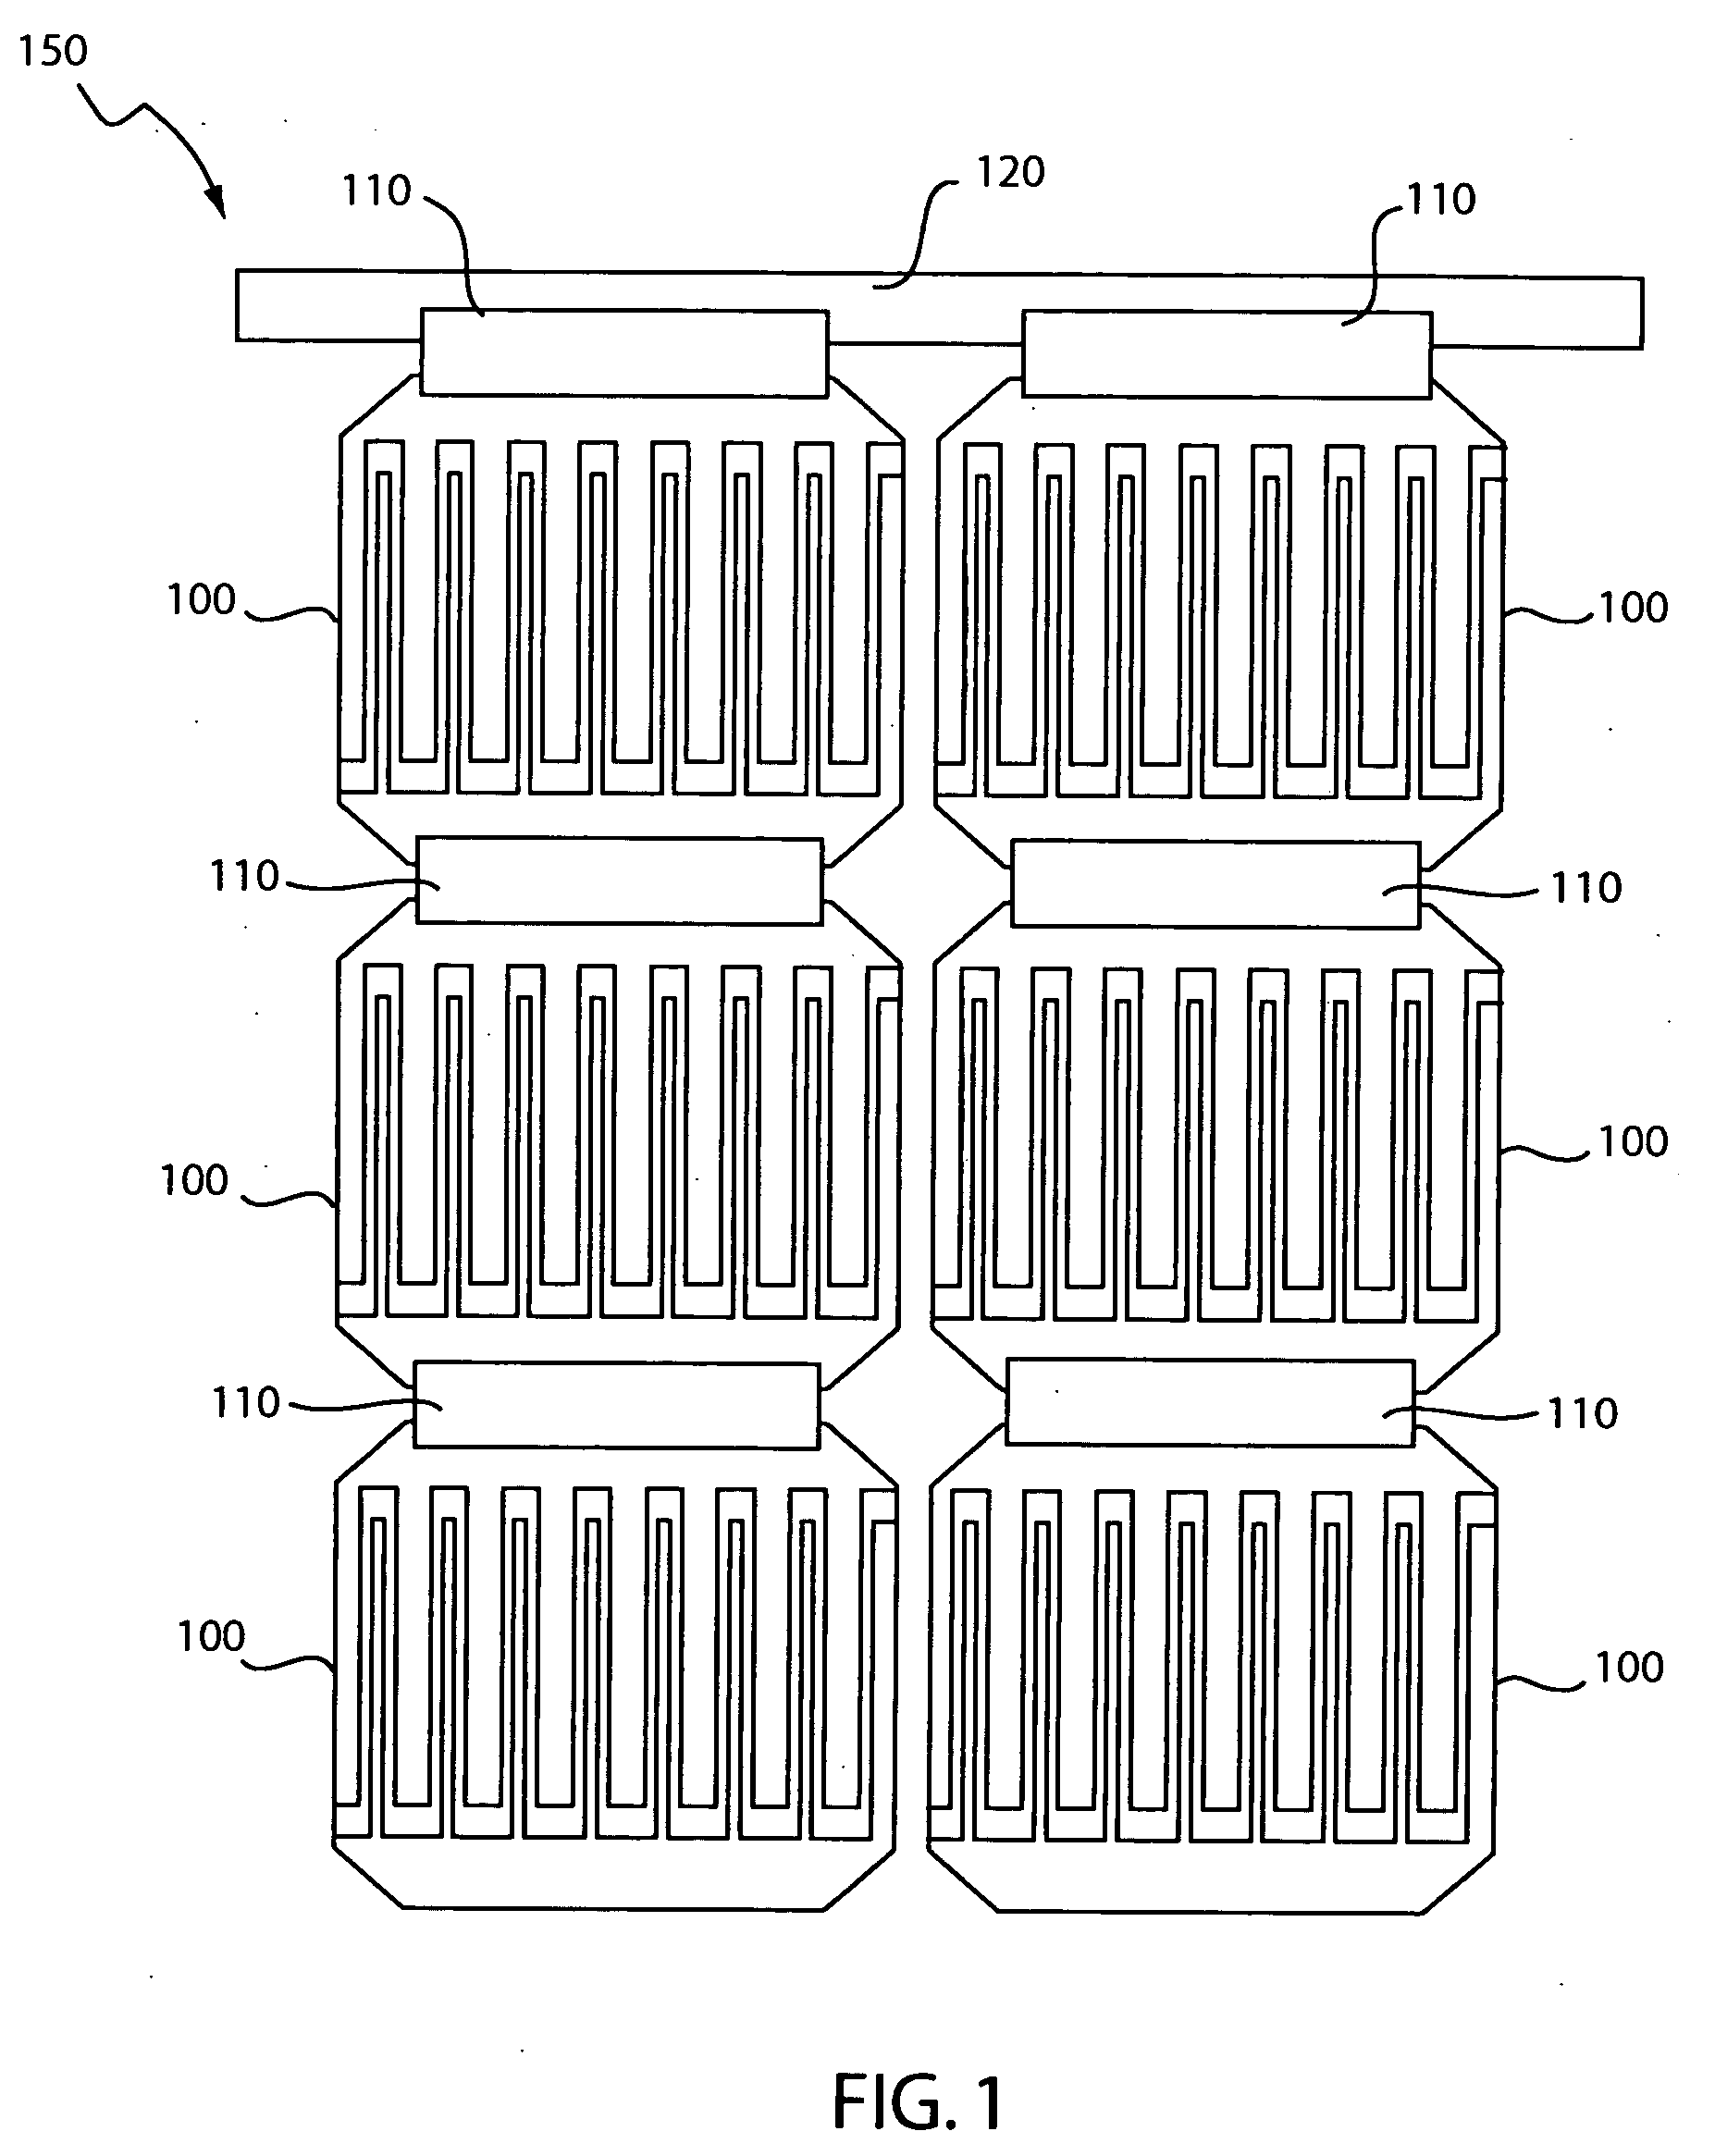 Interconnection of solar cells in a solar cell module